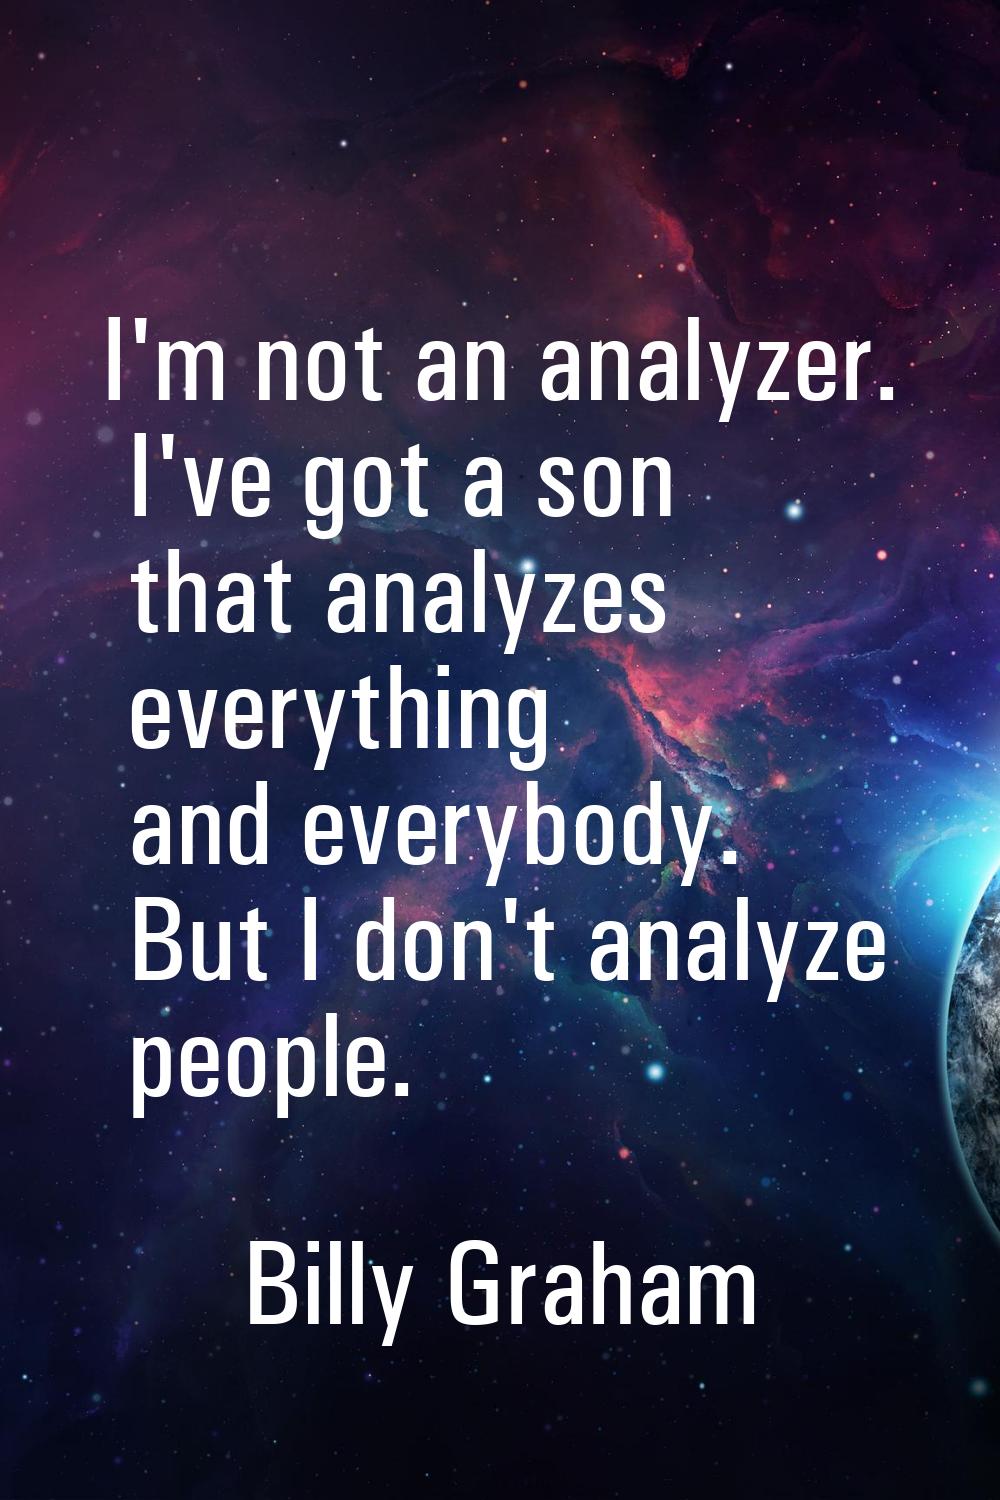 I'm not an analyzer. I've got a son that analyzes everything and everybody. But I don't analyze peo